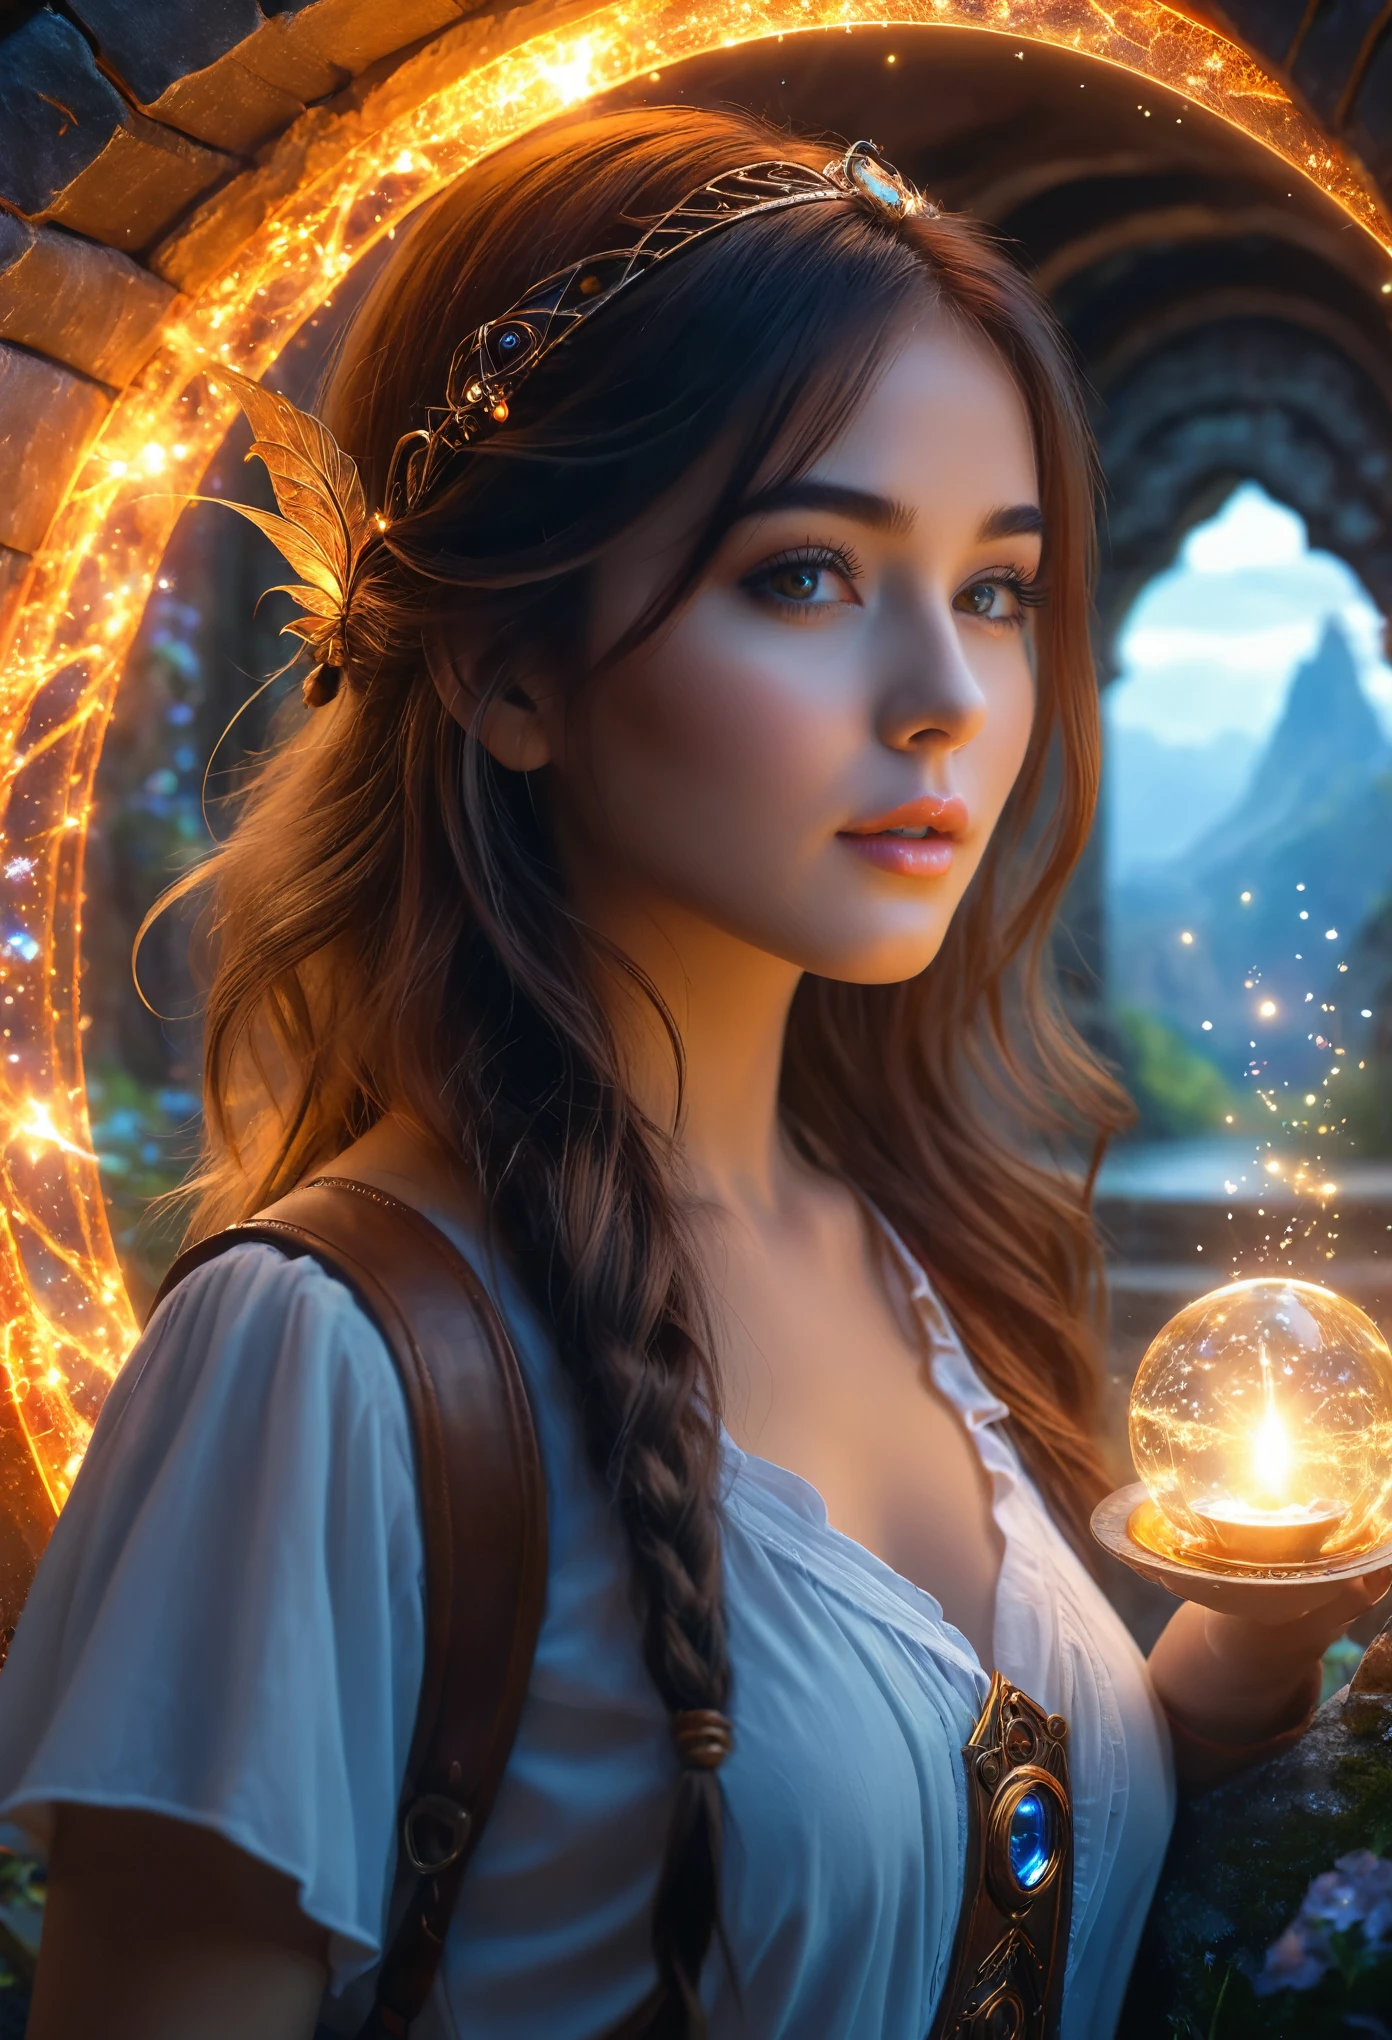 ，Beautiful girl, Fantasy world with magic portal, Everything is magical, The atmosphere is magical, Photo Real, Attention to detail, Highest quality, 4K